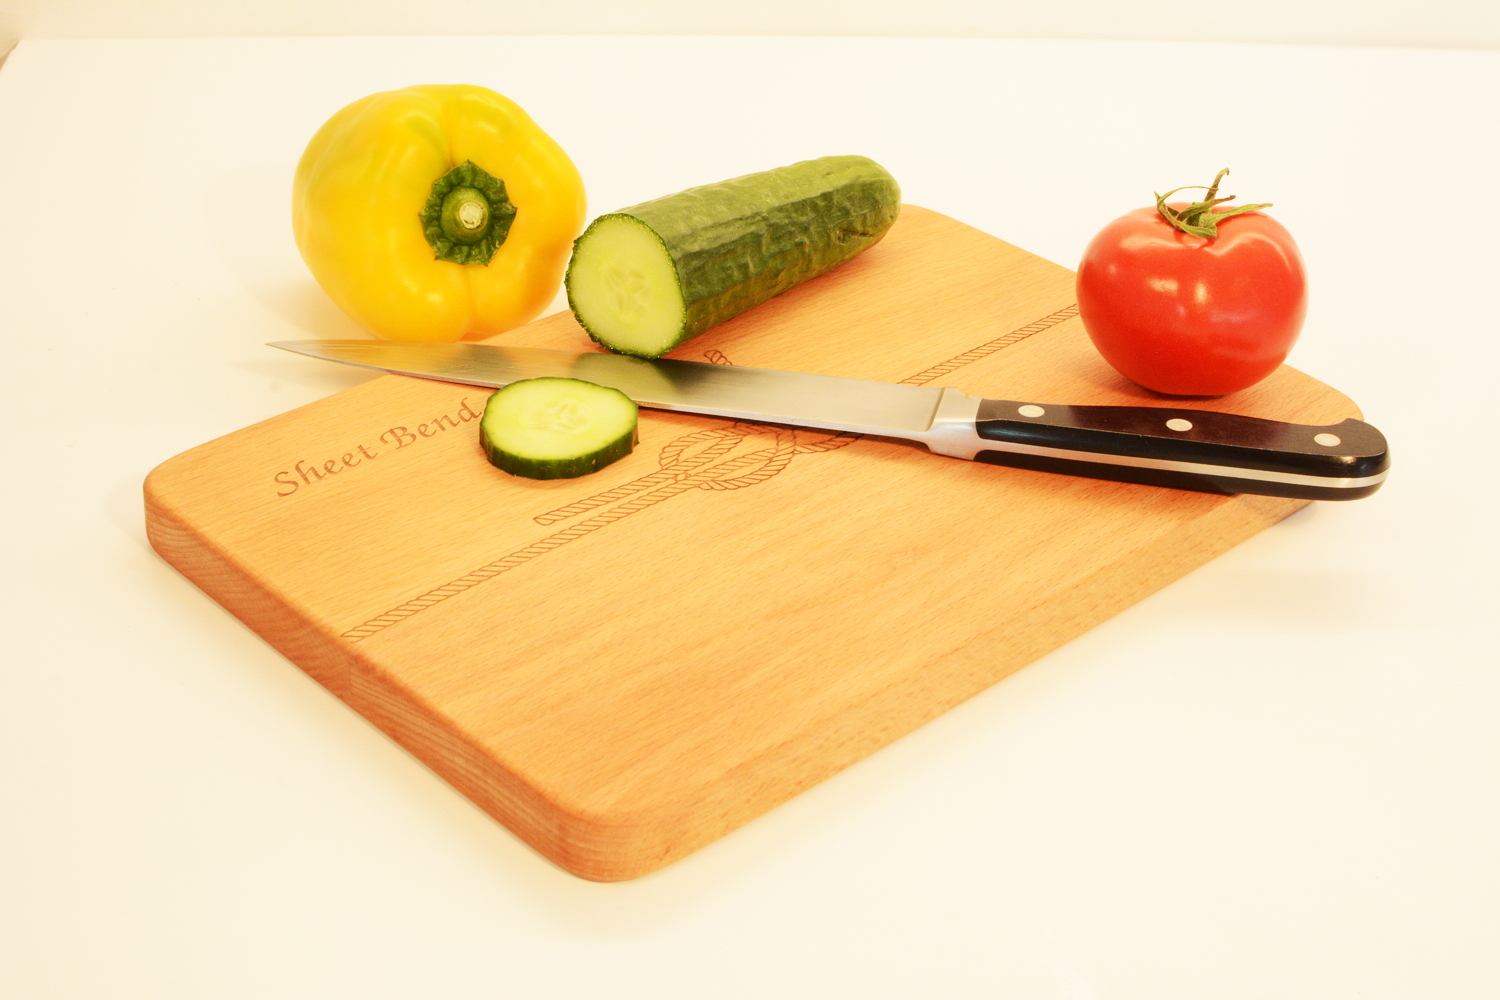 Cutting Board in use, cutting vegetables